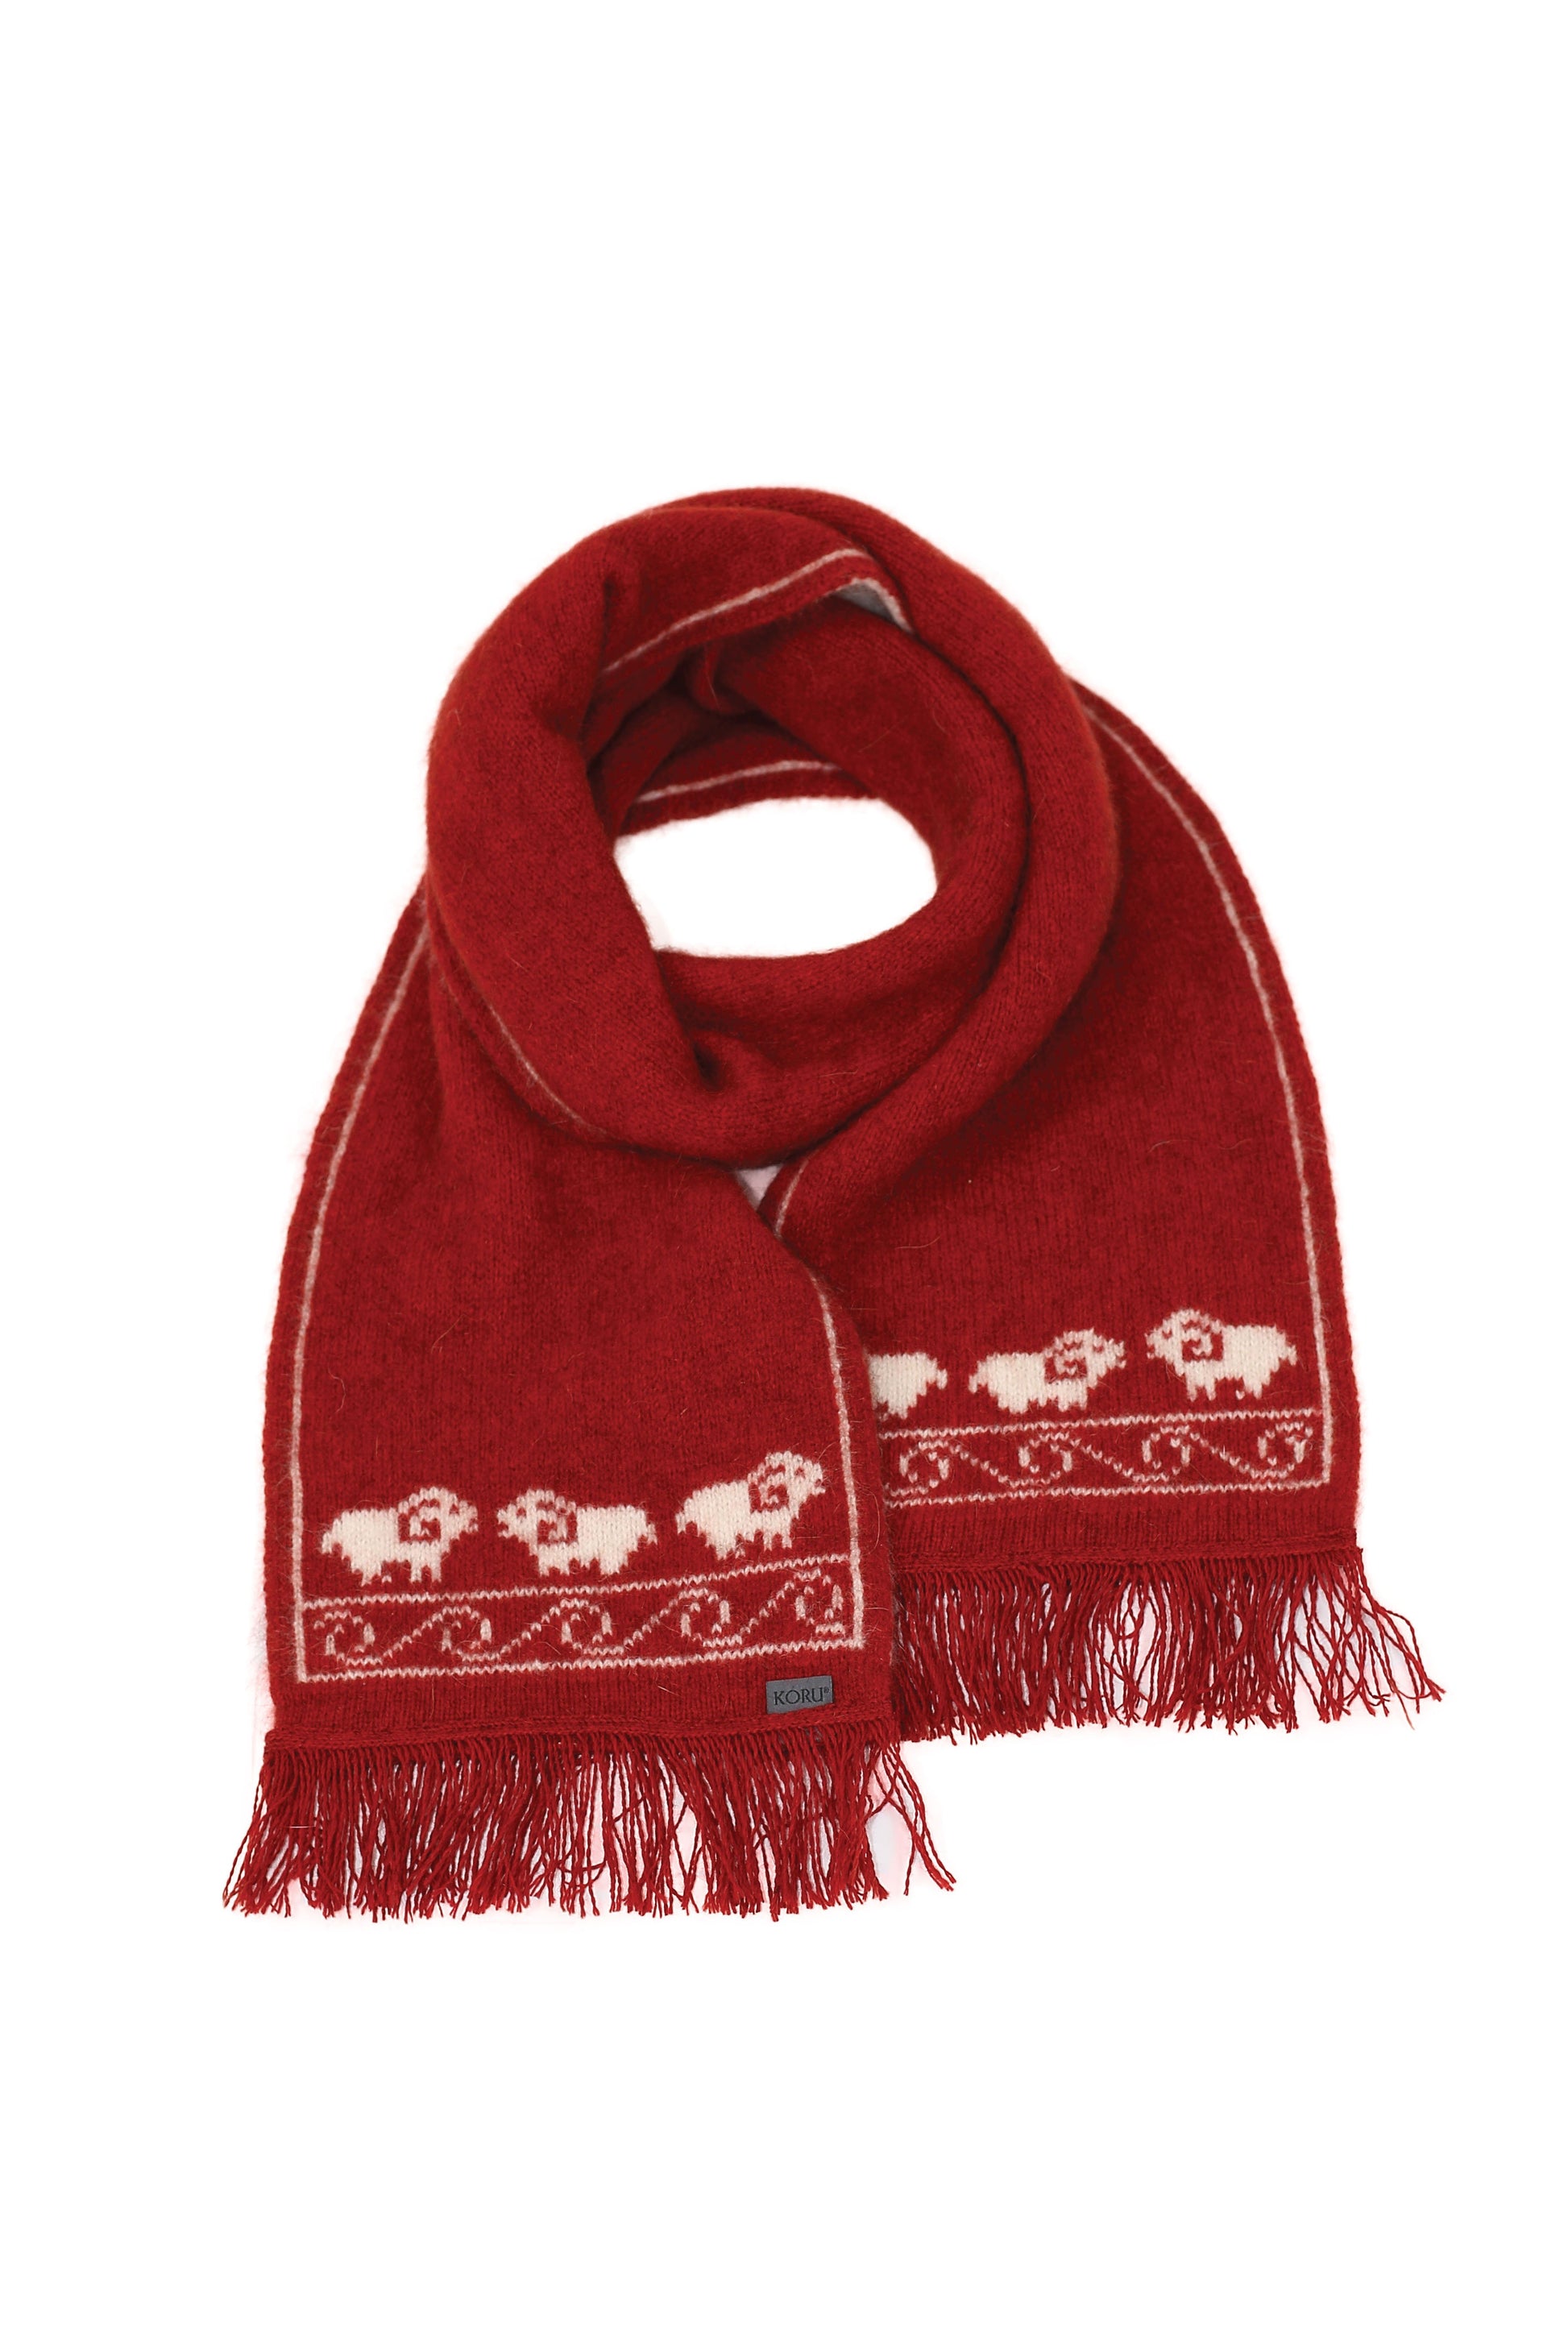 SHEEP SCARF - Woolshed Gallery